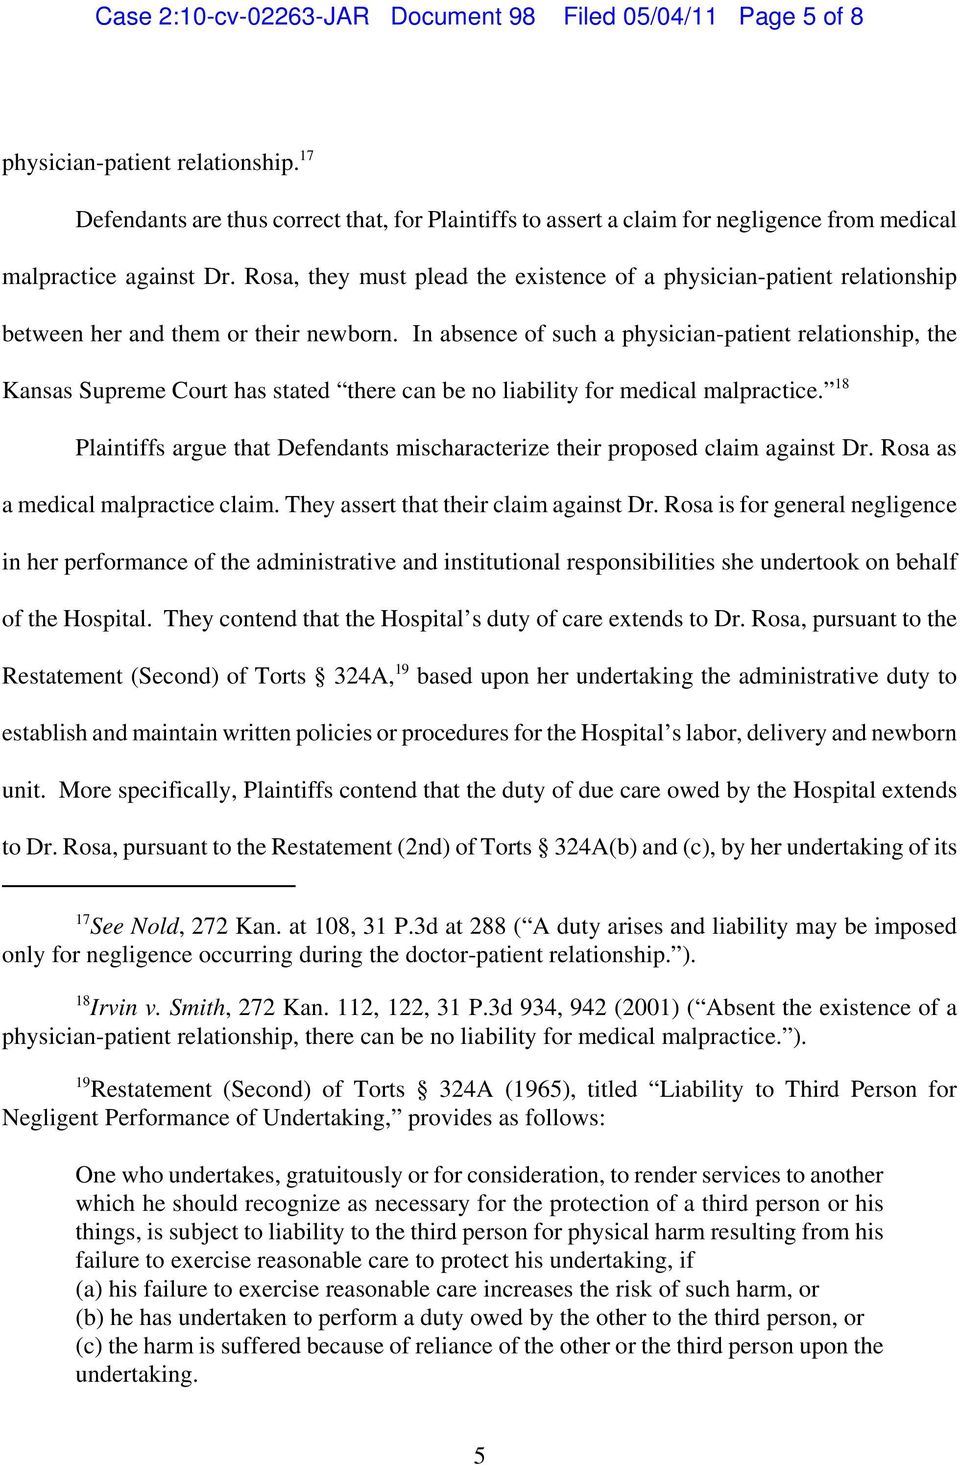 Rosa, they must plead the existence of a physician-patient relationship between her and them or their newborn.